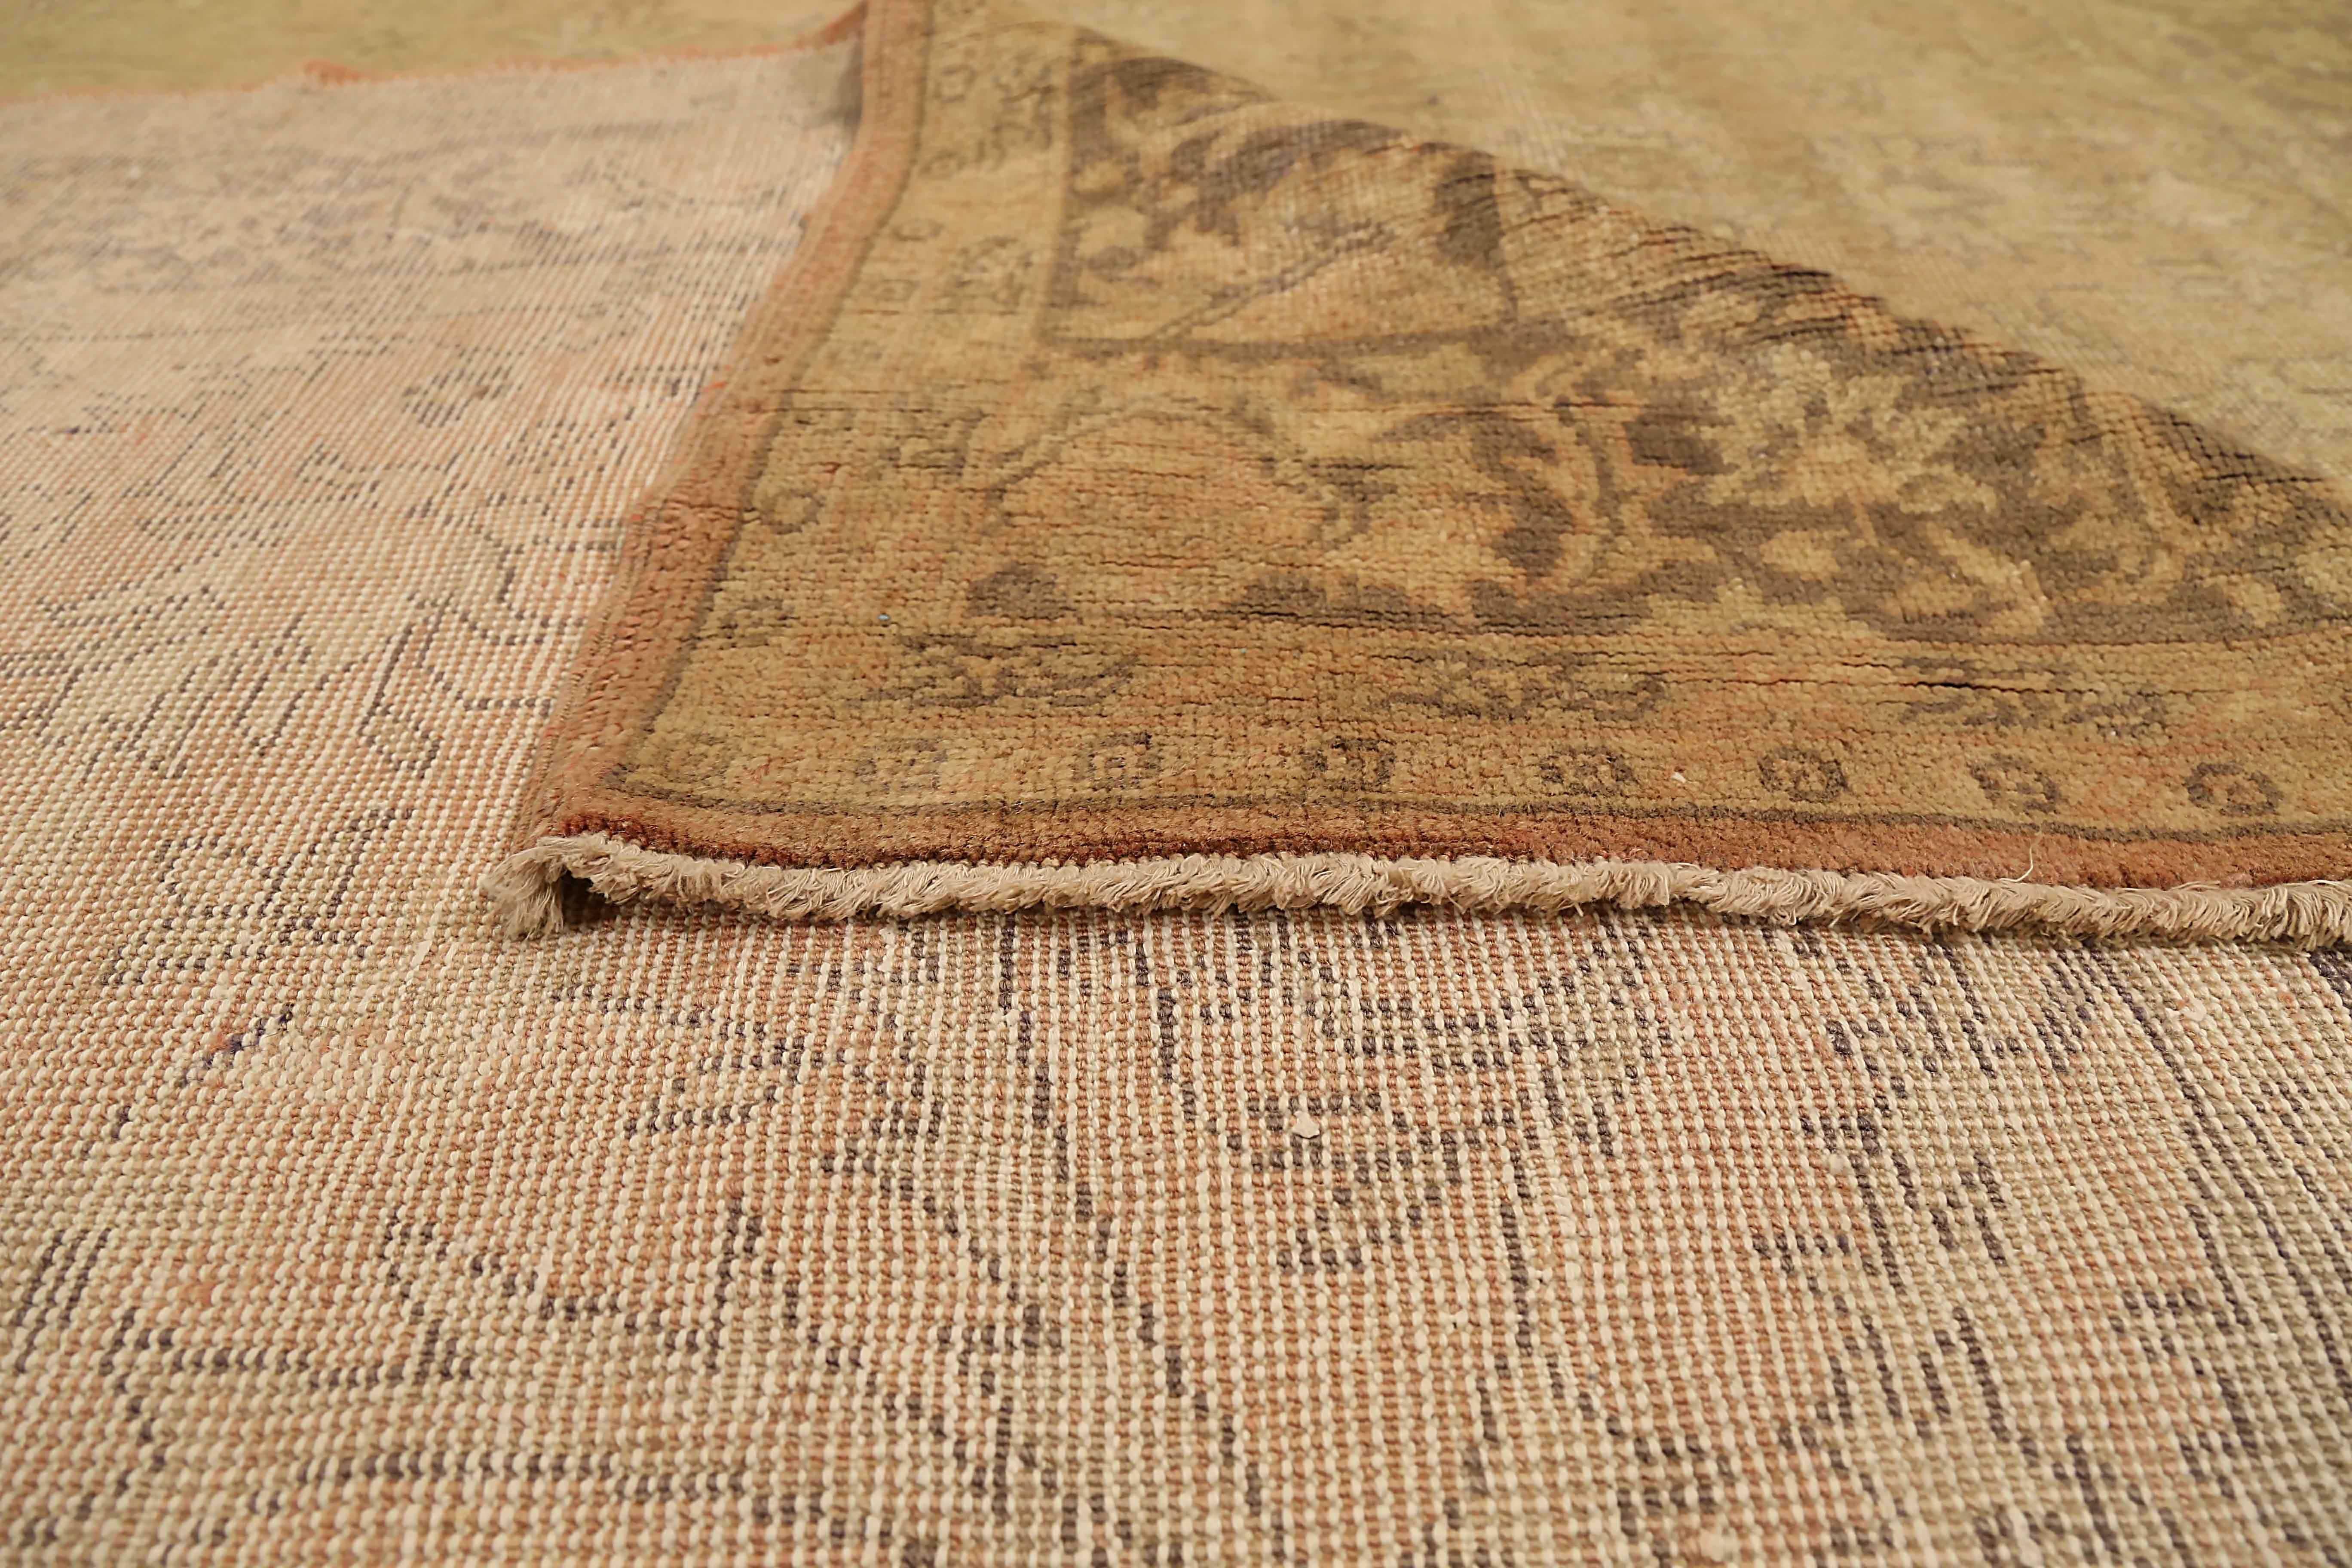 Antique Turkish Area Rug Oushak Design In Excellent Condition For Sale In Dallas, TX